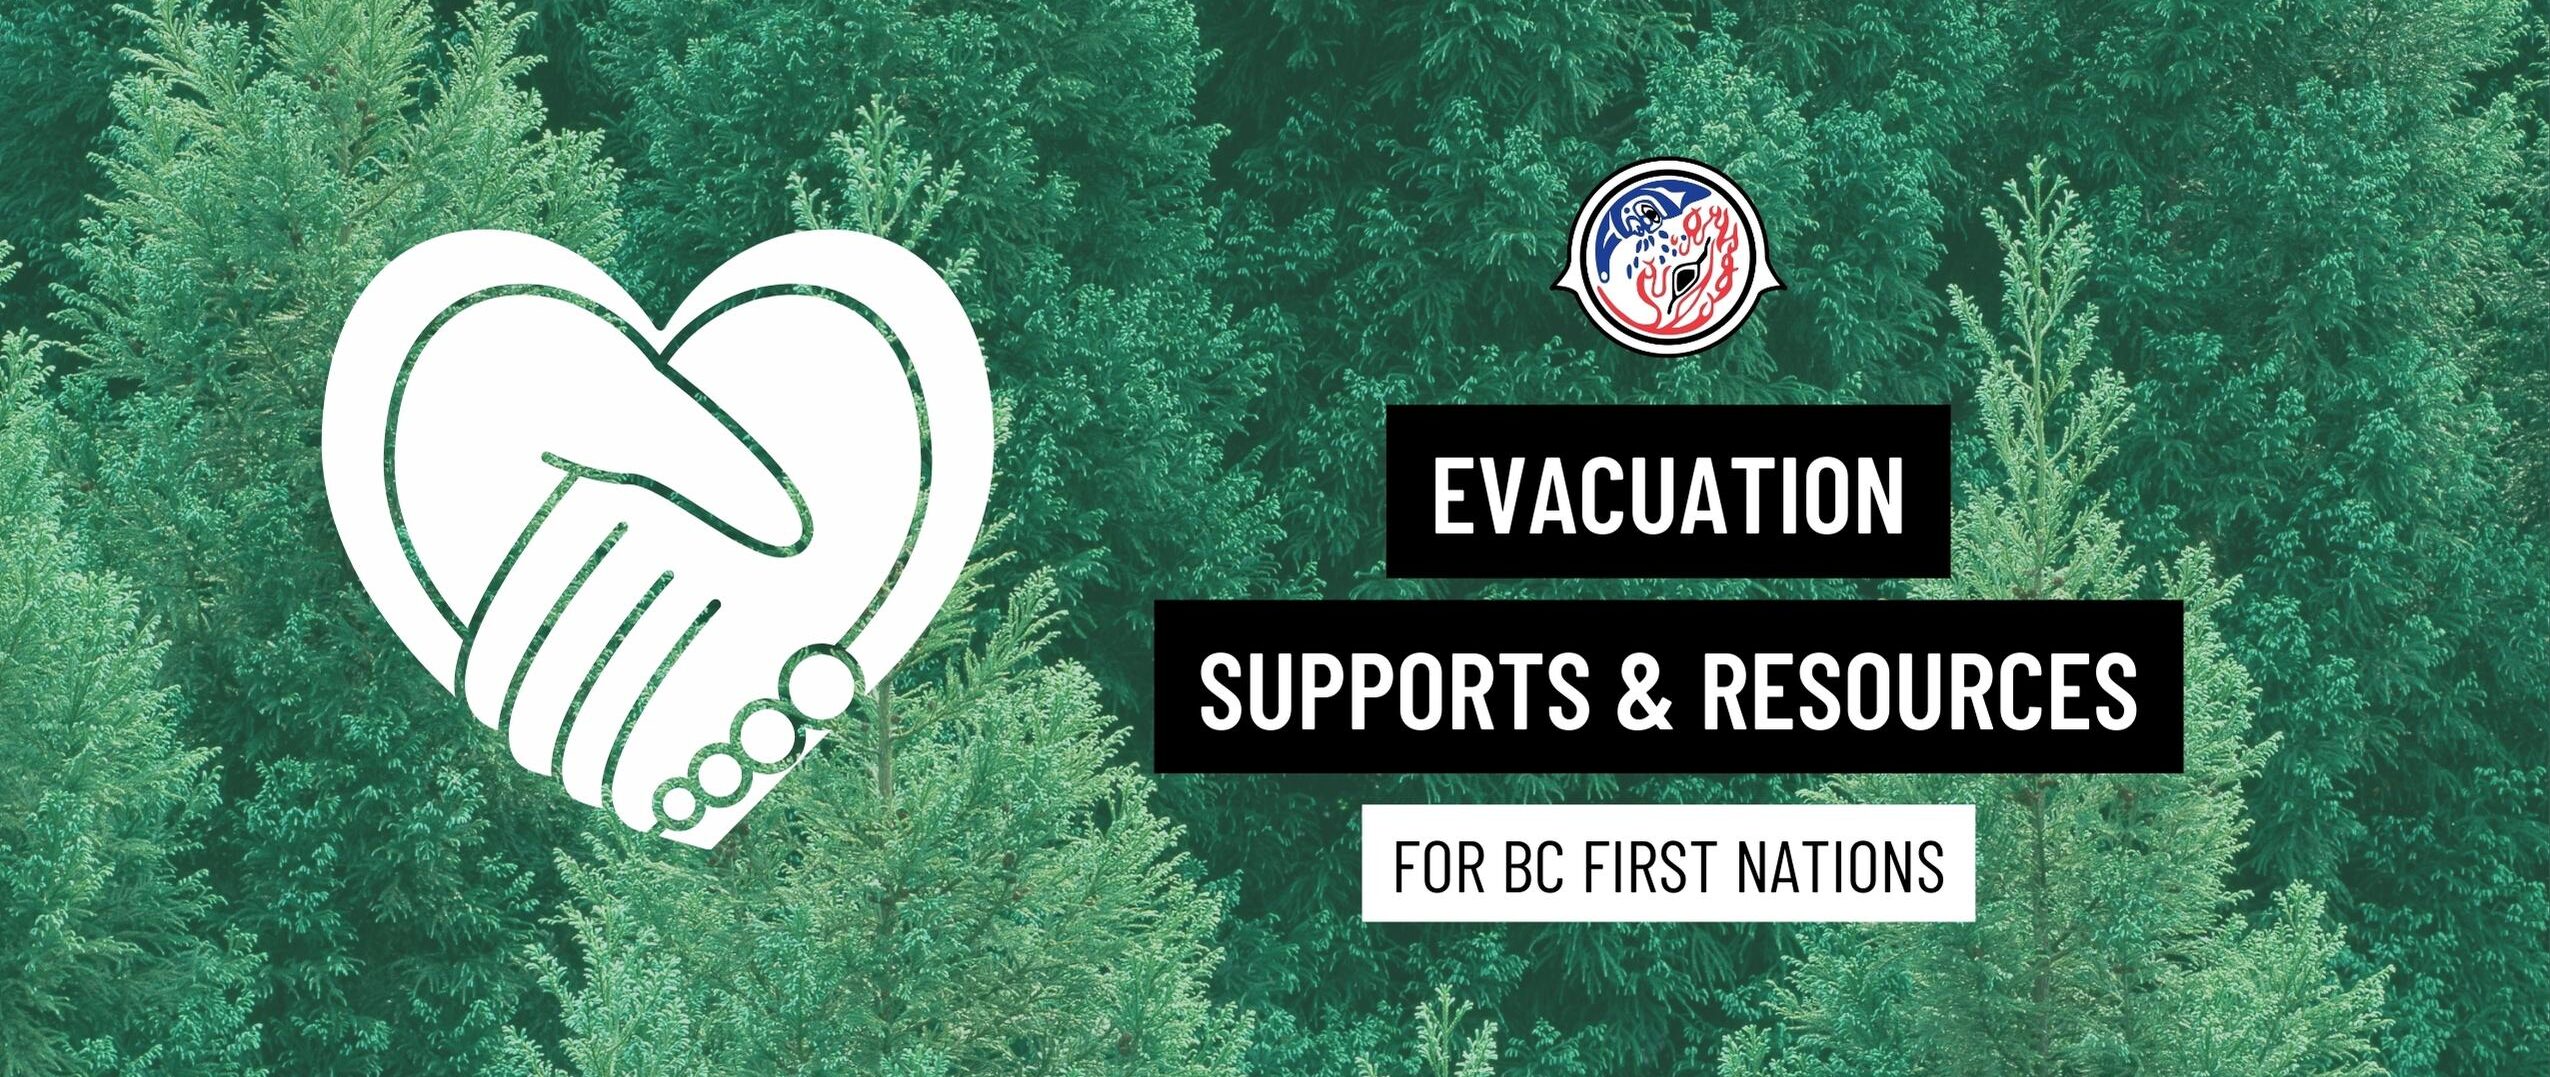 heart and hands graphic over trees and text that says evacuation supports and resources for BC first nations